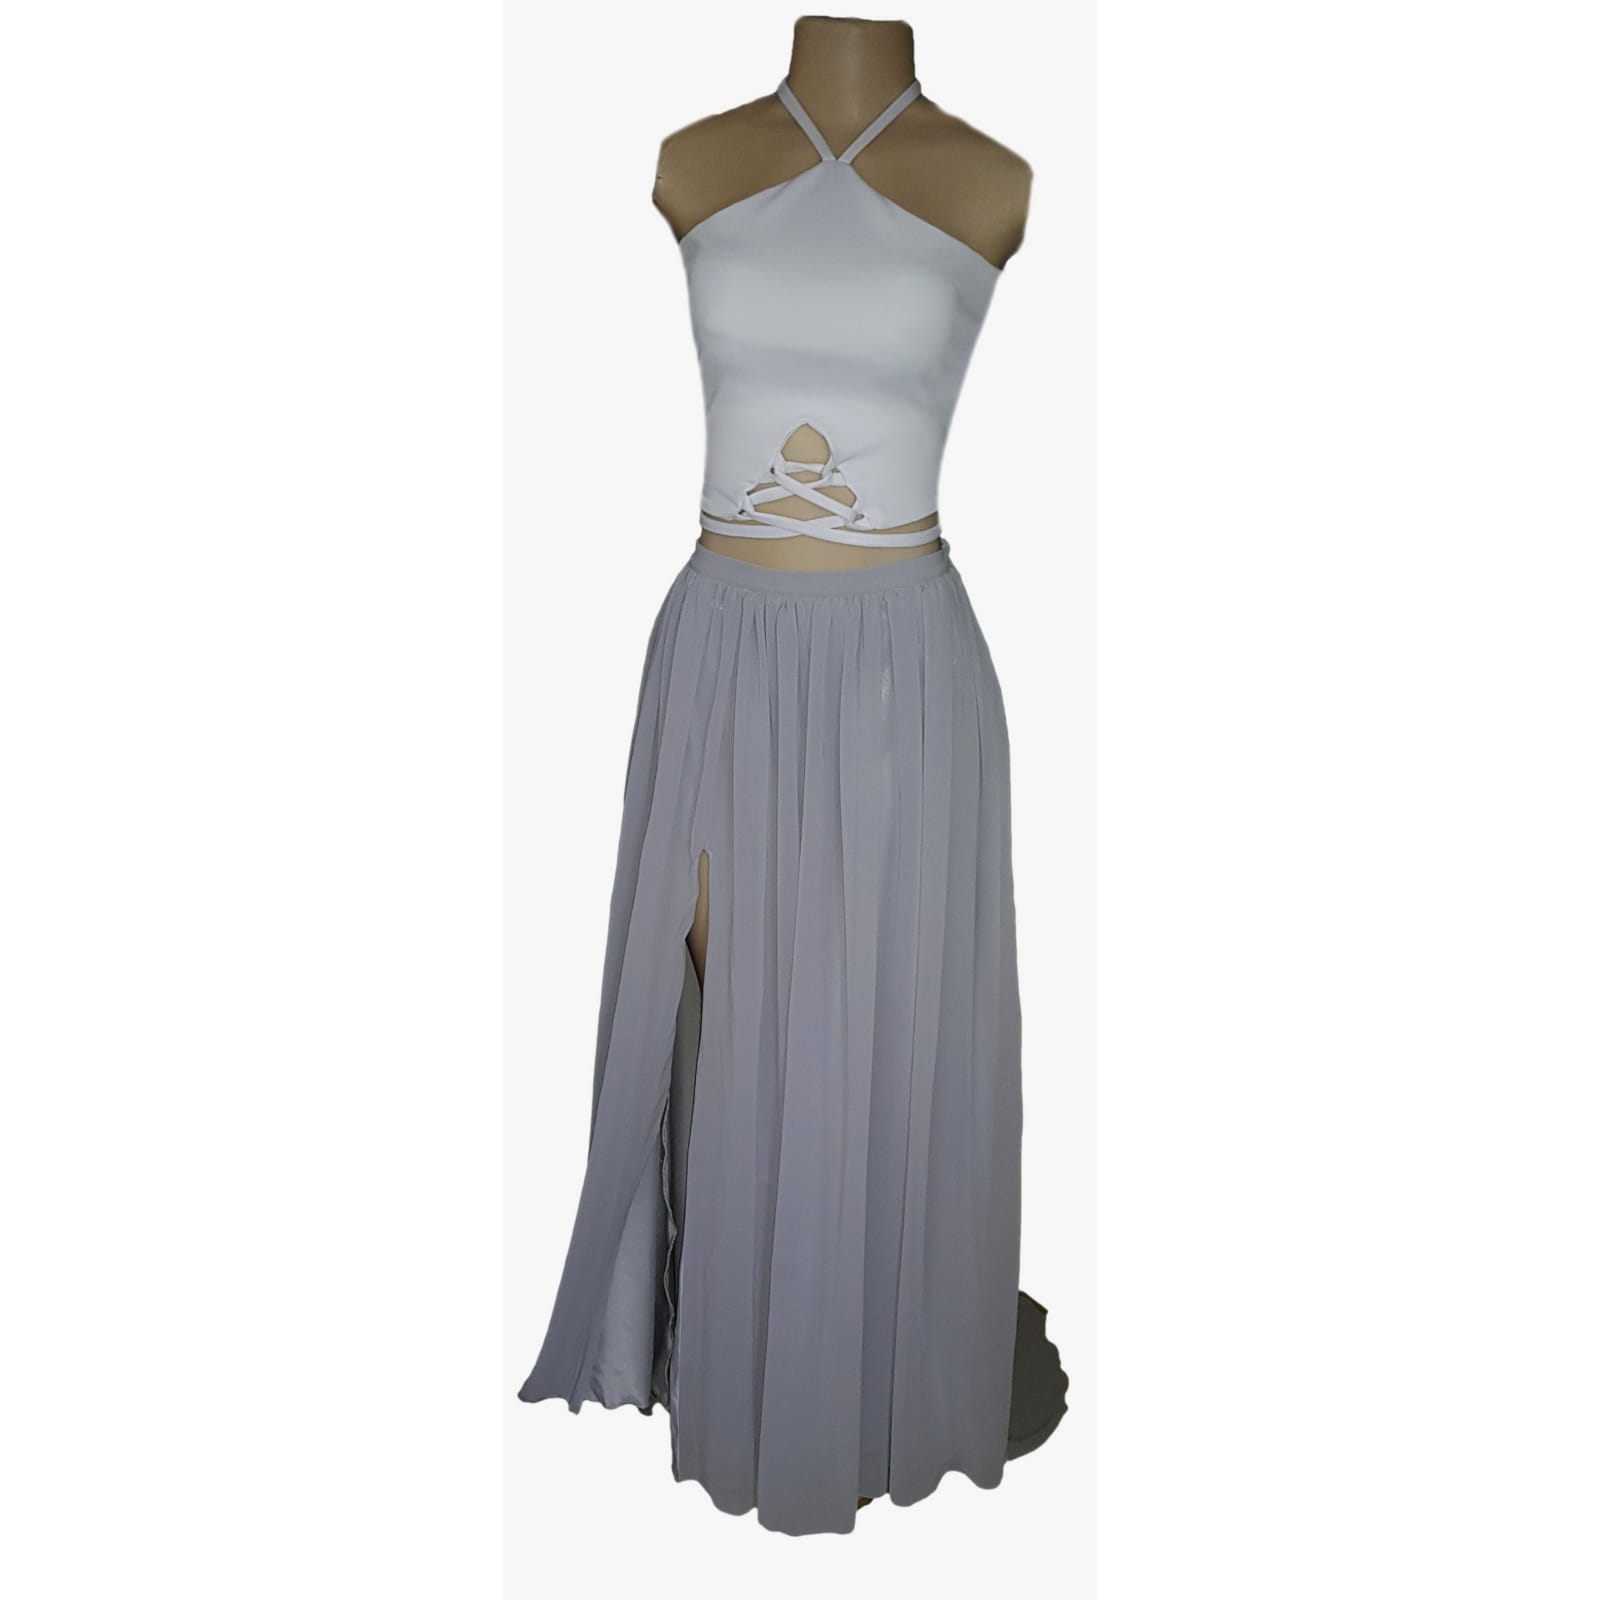 Grey and white 2 piece evening dress 4 grey and white 2 piece evening dress. Backless top lace-up detail, flowy chiffon skirt with a slit and a train.